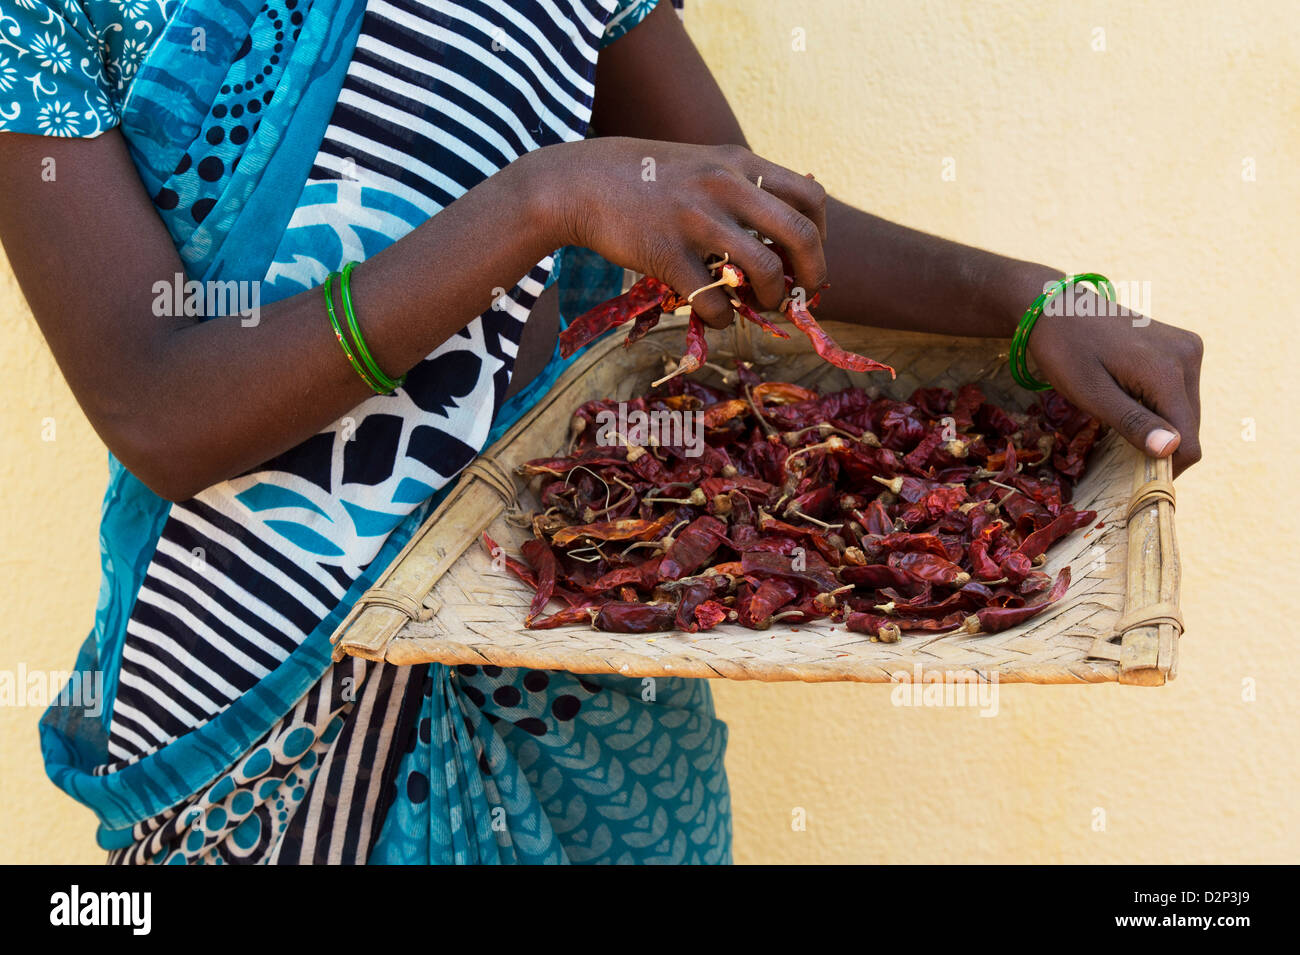 Rural Indian village woman collecting Dried red chilies in a weaved tray after drying in the sun. Andhra Pradesh, India Stock Photo